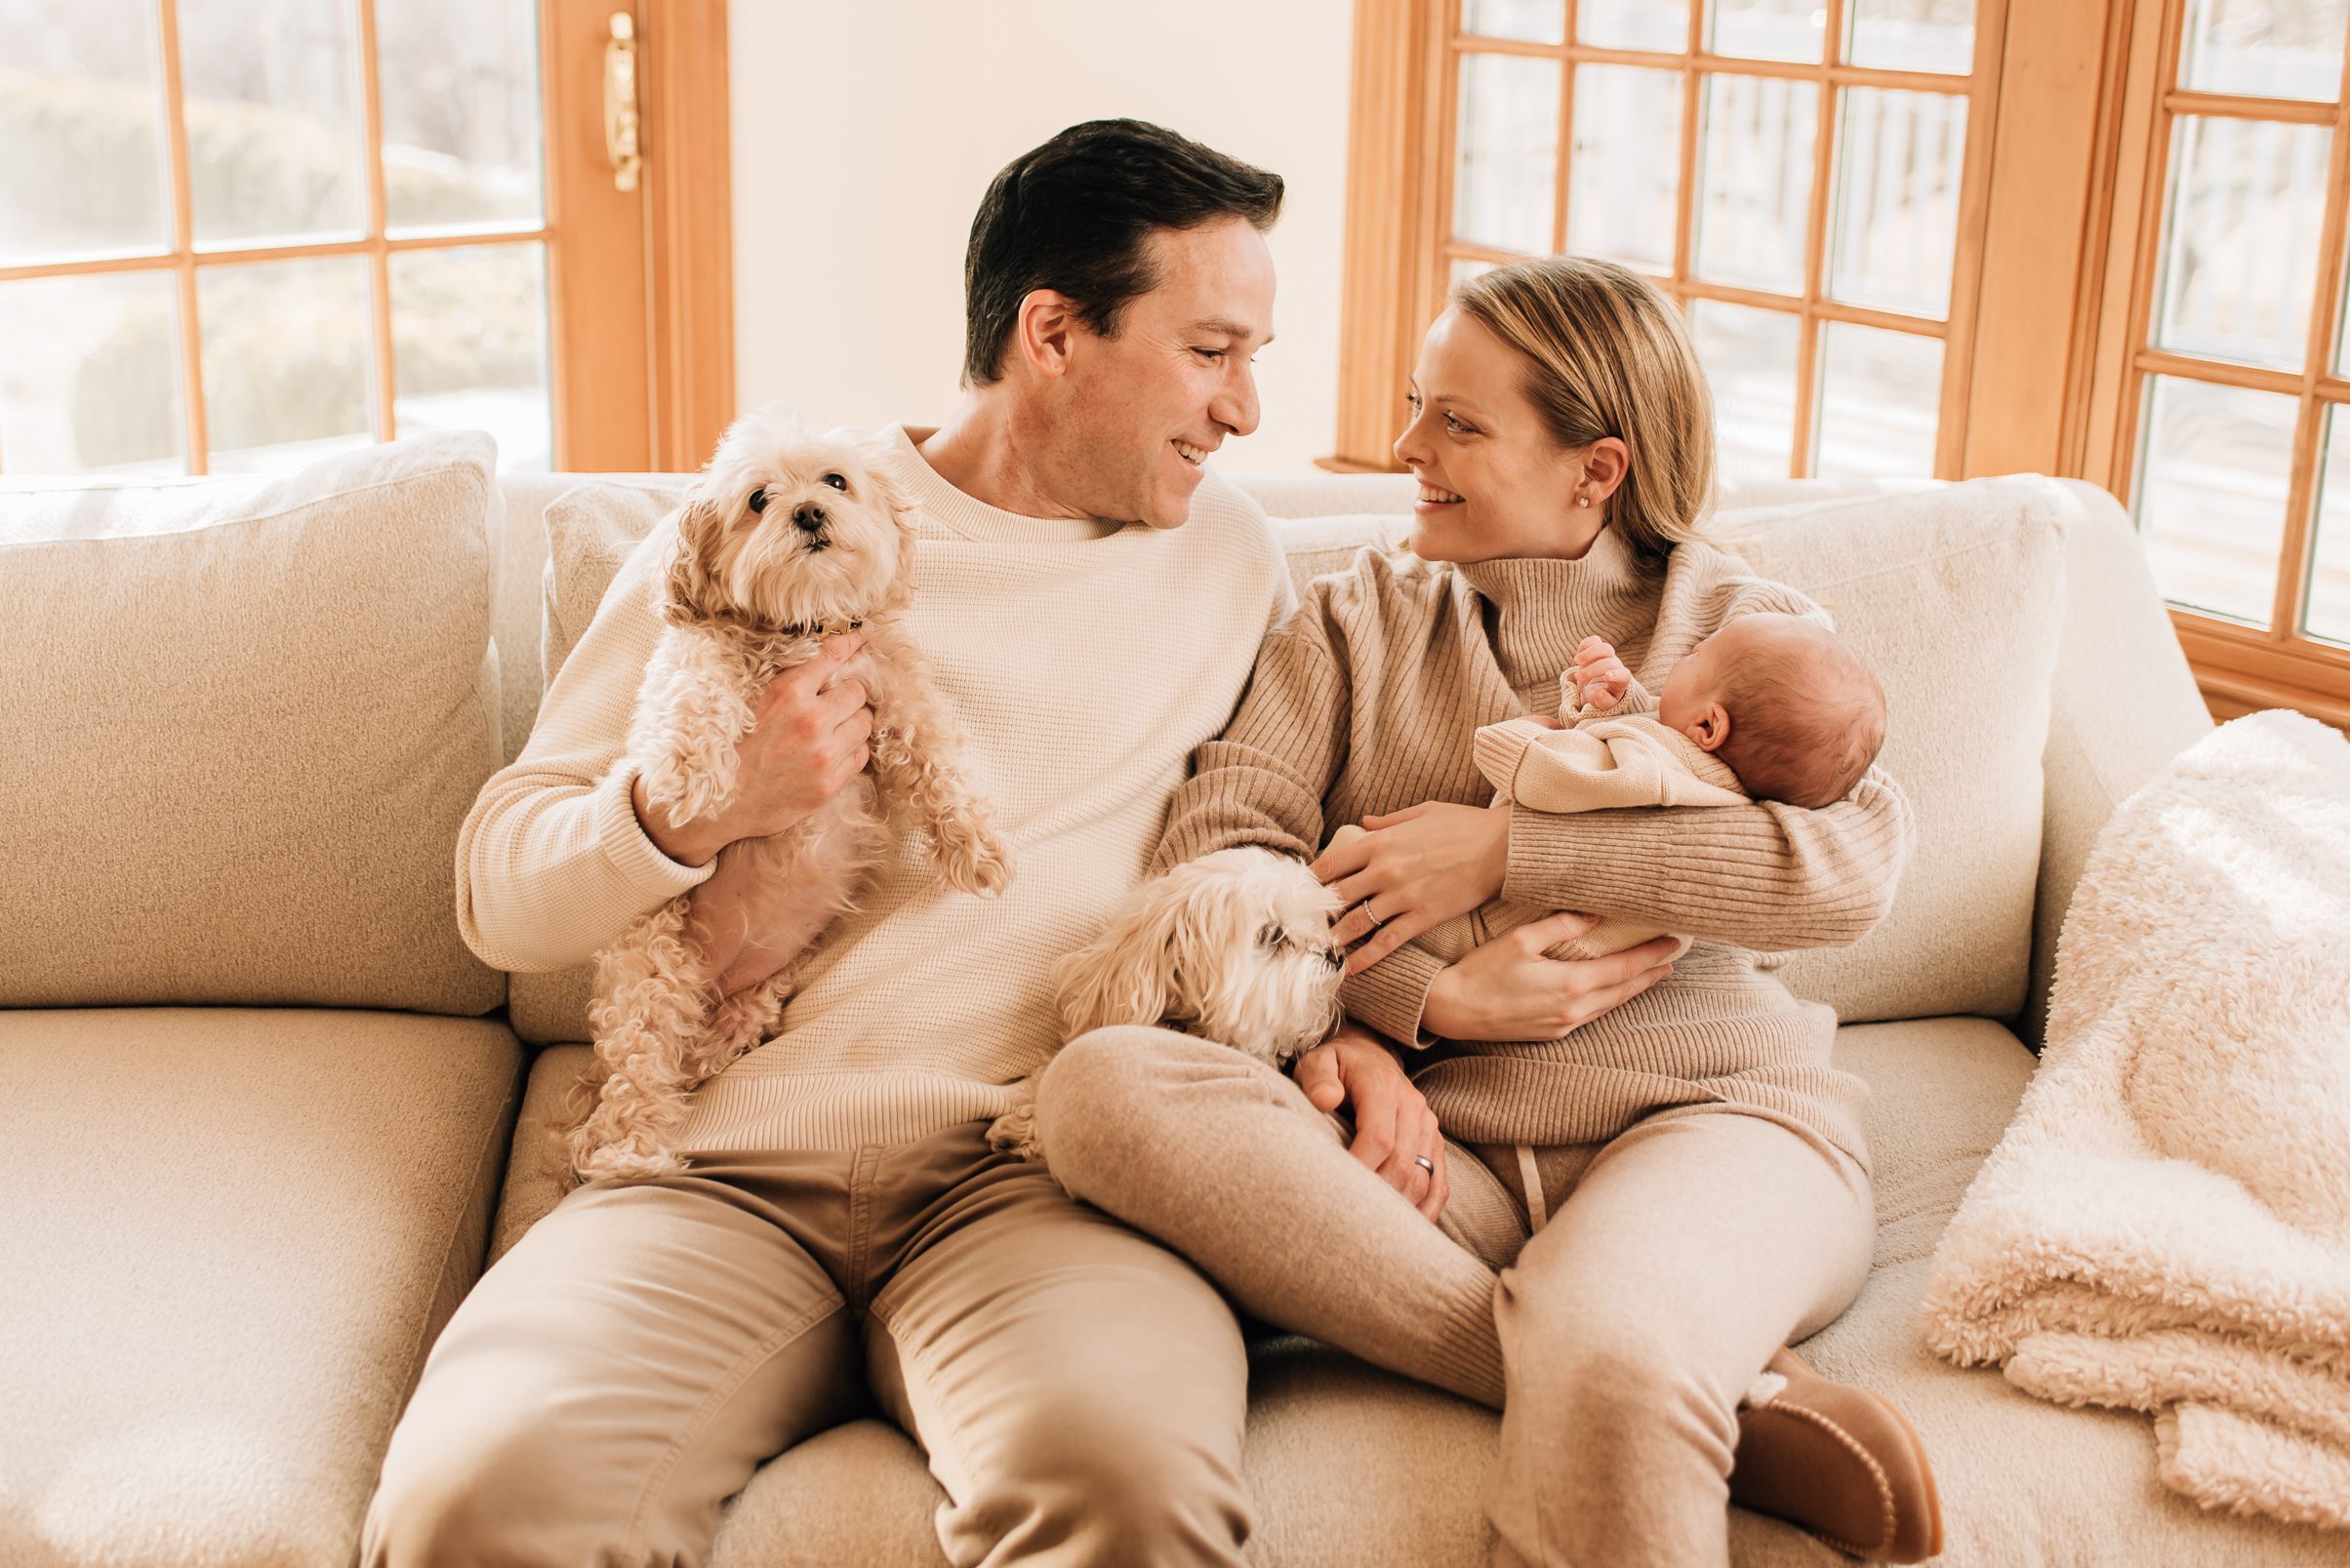 In-Home Newborn Session | Simsbury, Connecticut | Sharon Leger Photography